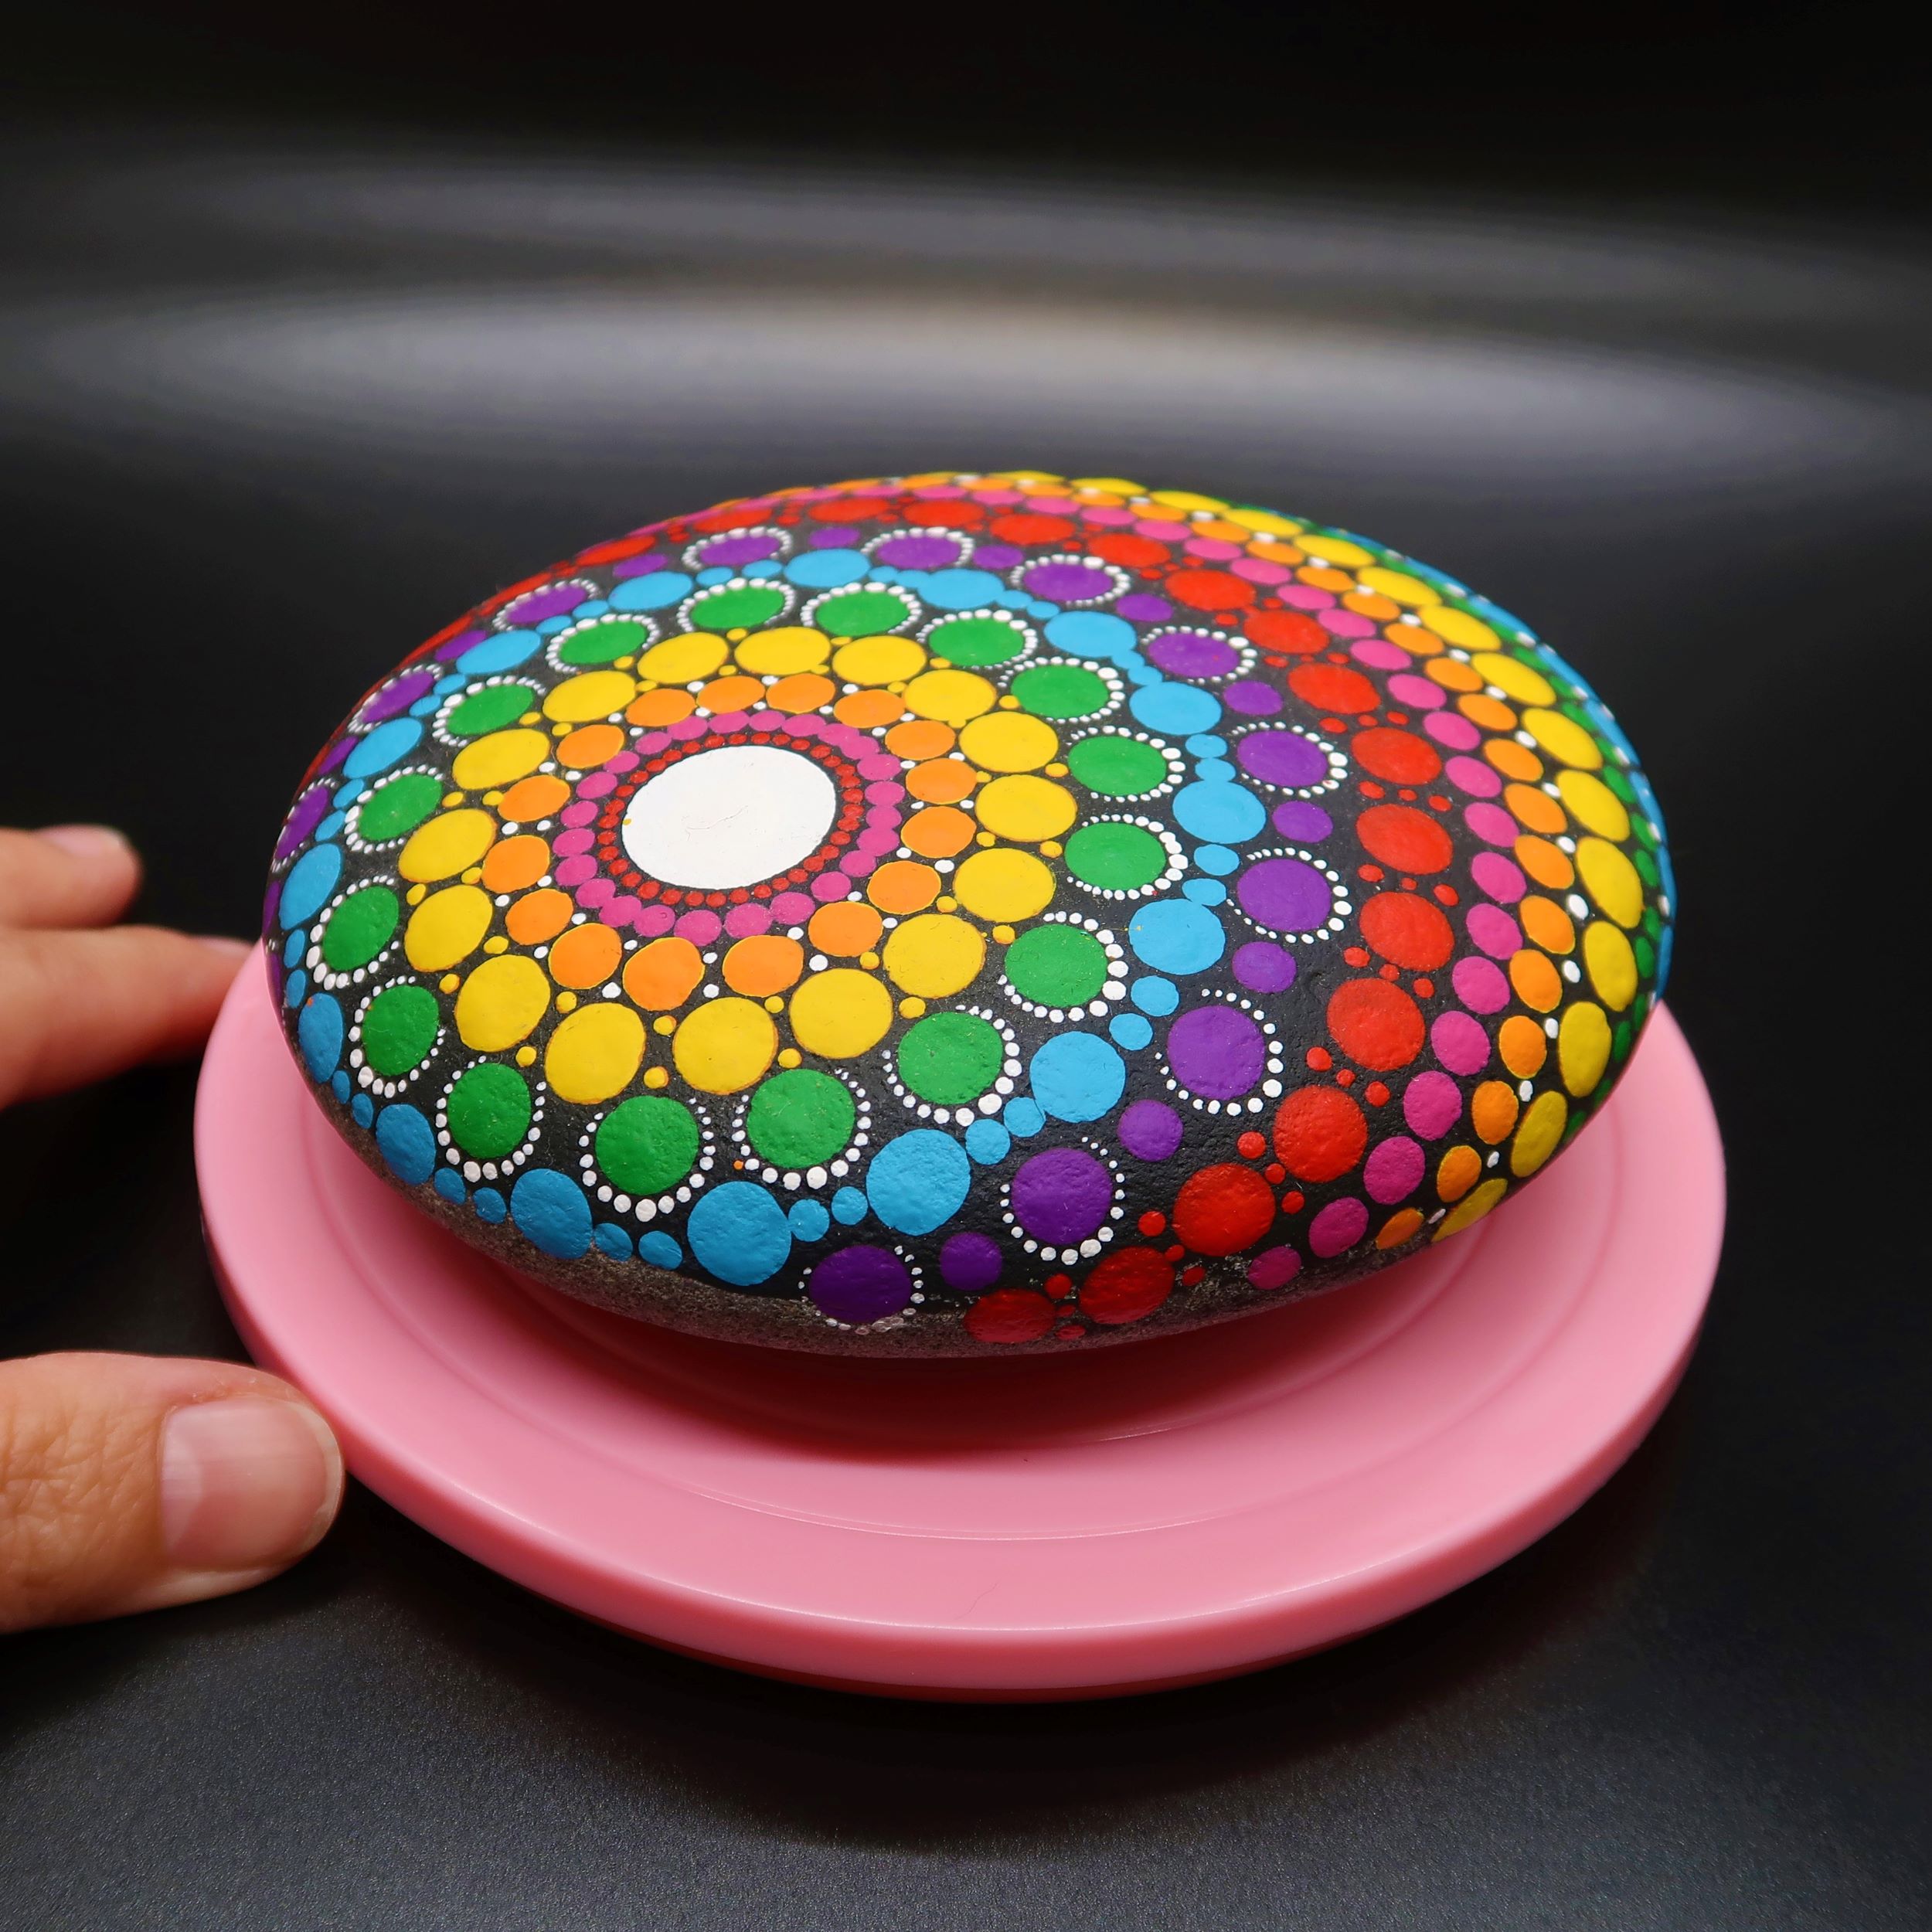 Happy Dotting Company 4 - Turntable for Painting - Happy Dotting Company - Best Small Turntable for Dot Art - Must-Have Tool for Mandala Art Stone